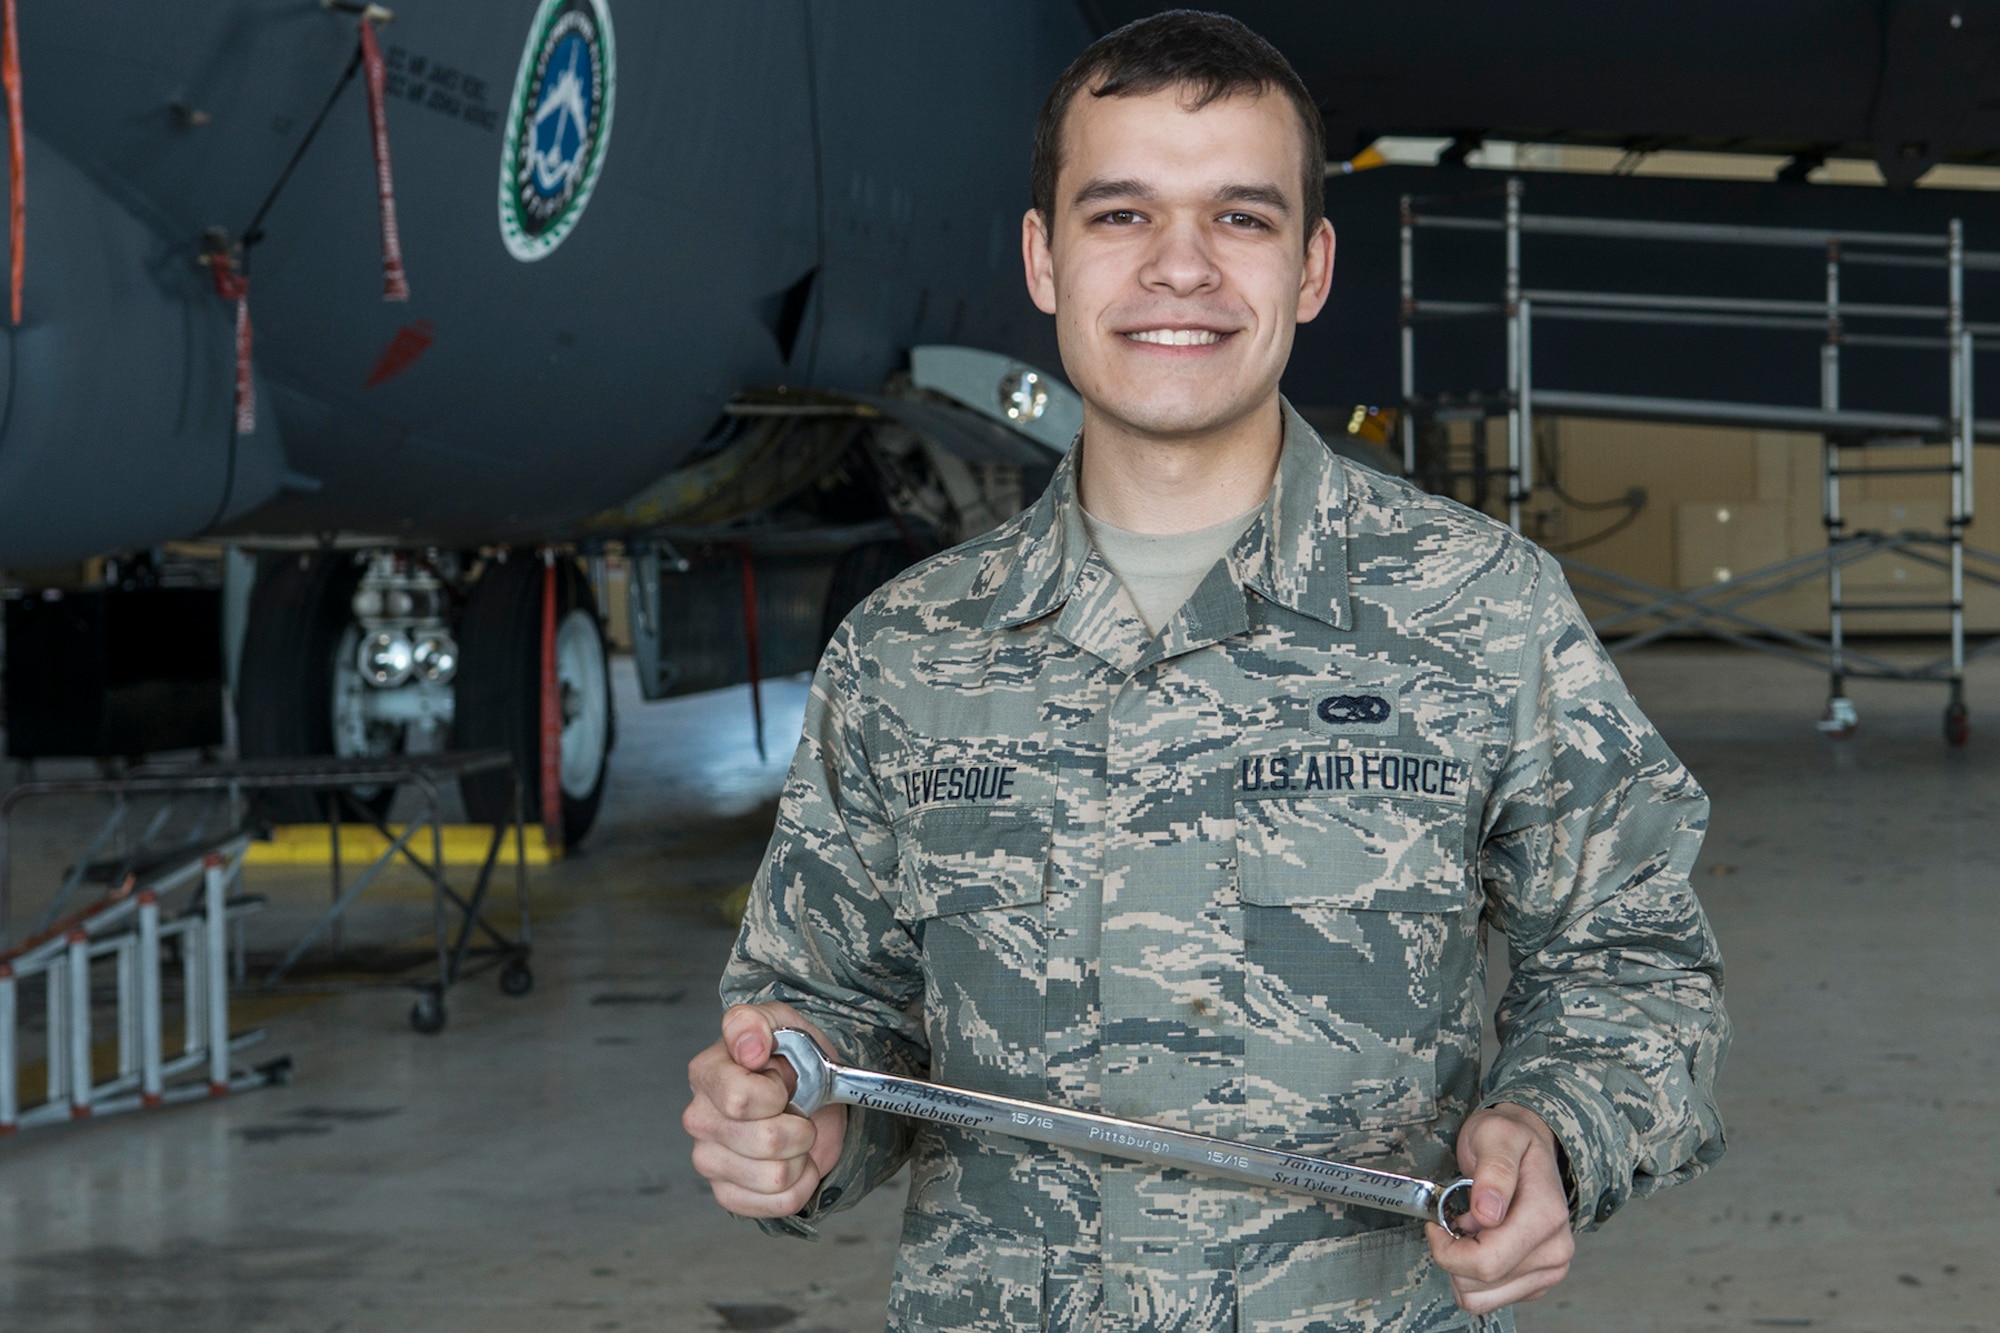 U.S. Air Force Senior Airman Tyler Levesque received the “Knuckle Buster” award on Jan. 25, 2019, Barksdale Air Force Base, Louisiana. Levesque is assigned to the 2nd Maintenance Squadron and received the award for discovering that two control cables (the Lateral Control cable and the Drag Chute cable) on a B-52H Stratofortress were improperly routed. His perserverance in ensuring the cables were correctly configured displayed his professionalism and dedication.  Levesque works with the 307th MXS as part of the Total Force Enterprise.  (U.S. Air Force photo by Greg Steele)